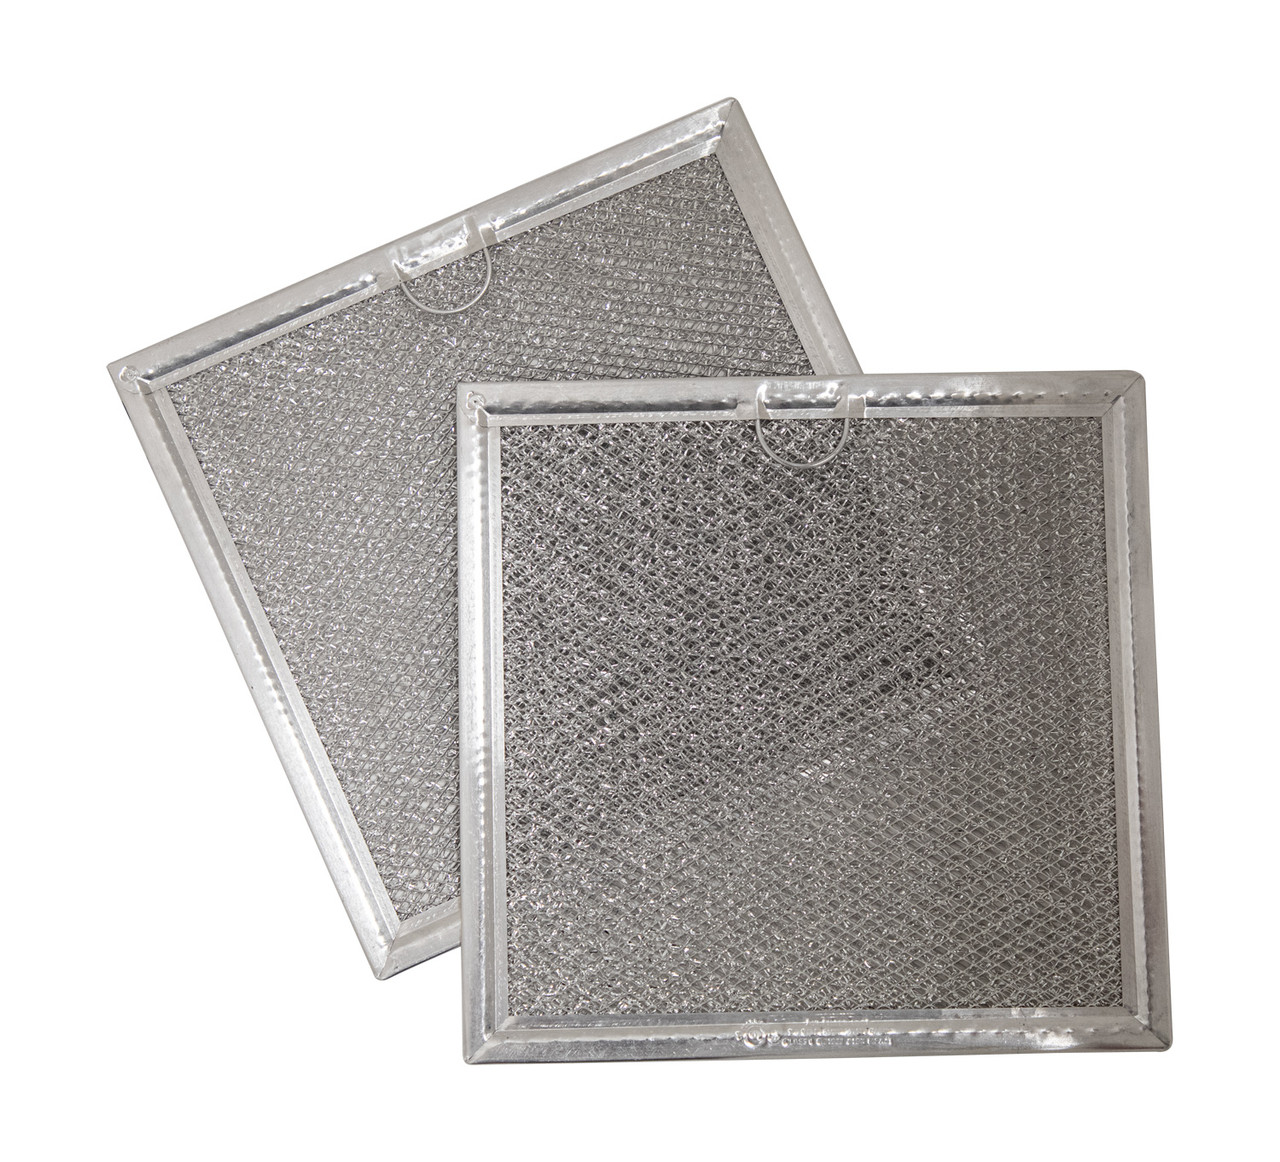 Sharp Grease Filters for SMO1969JS Over-the-Range Microwave Oven (RK245) 2 pack